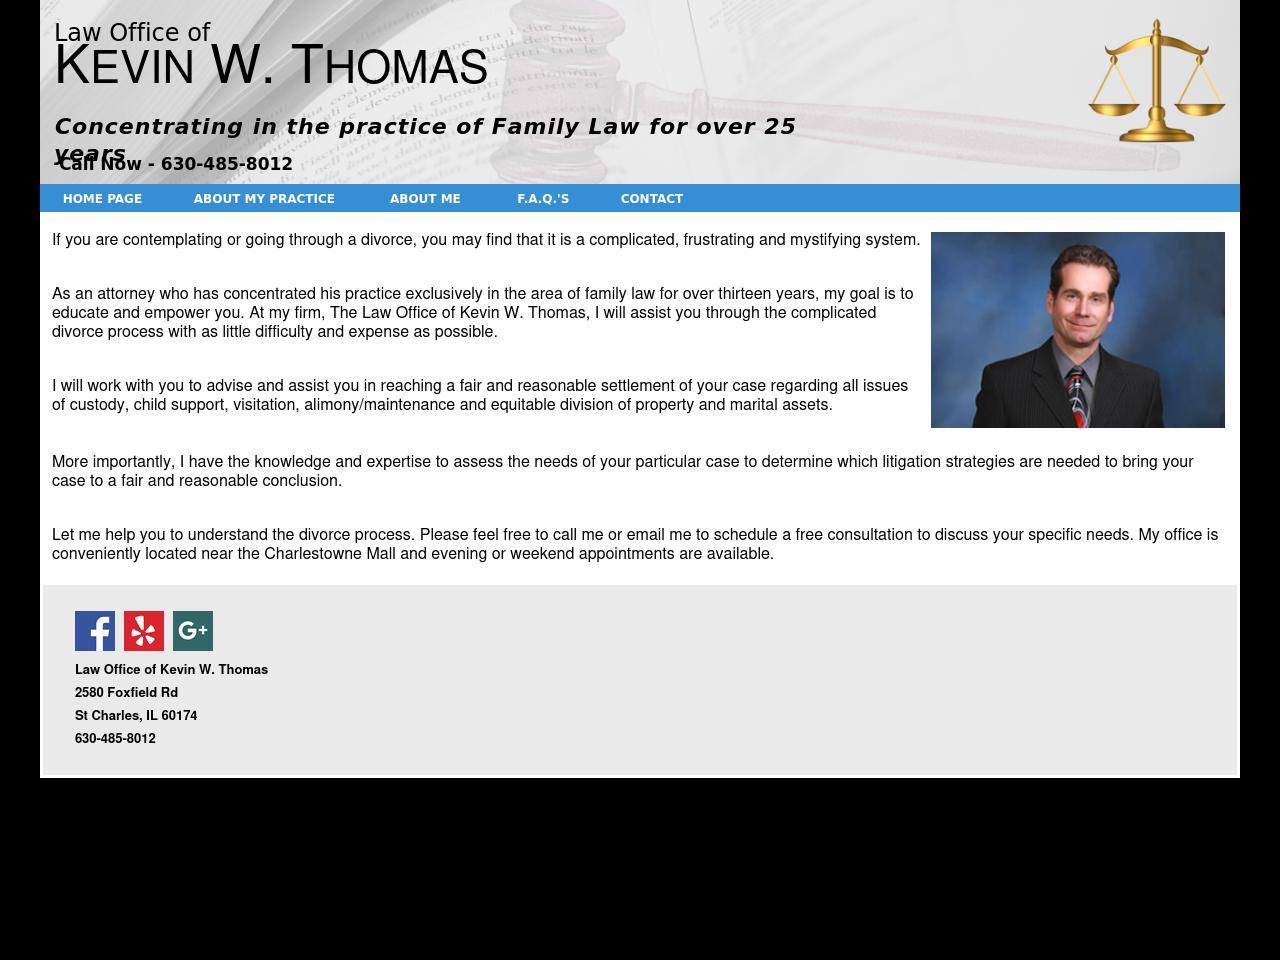 The Law Office of Kevin W. Thomas - Wheaton IL Lawyers